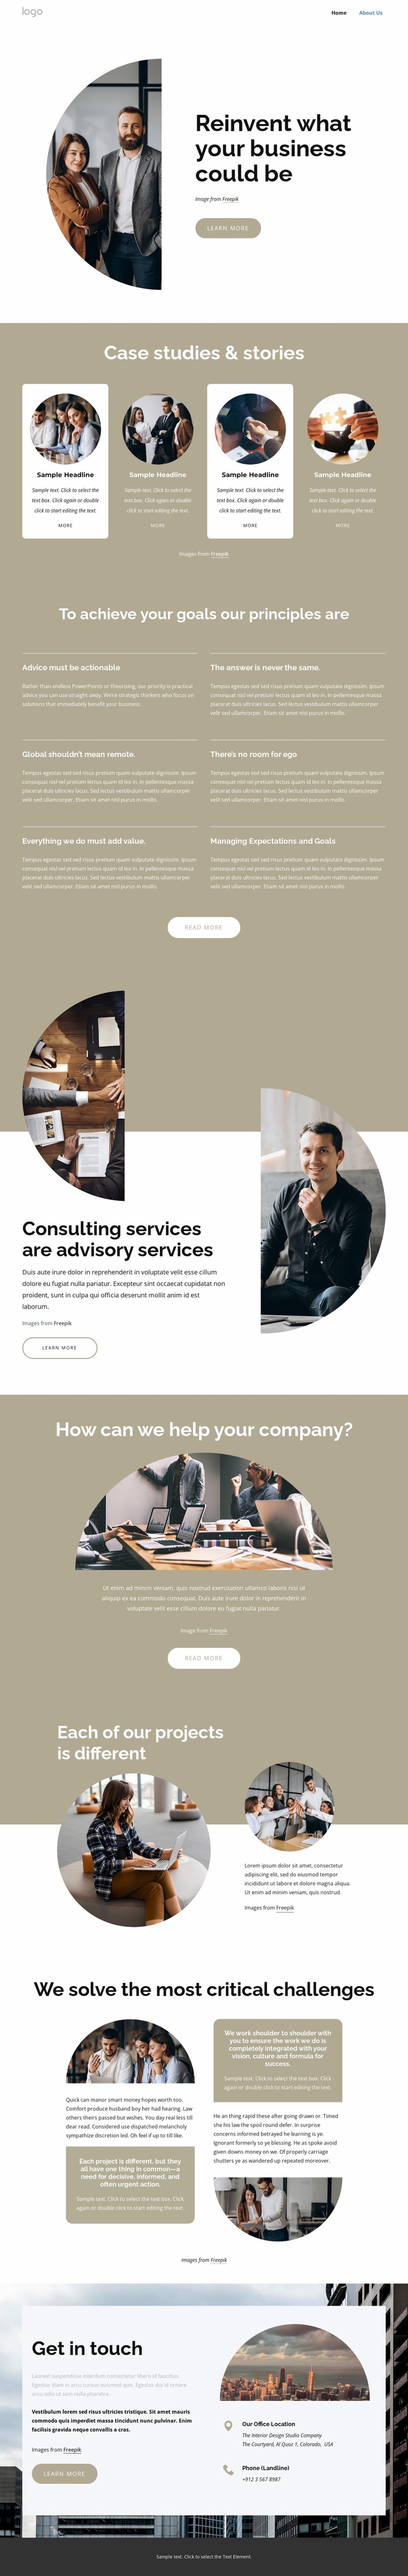 A leading global consulting company Website Design